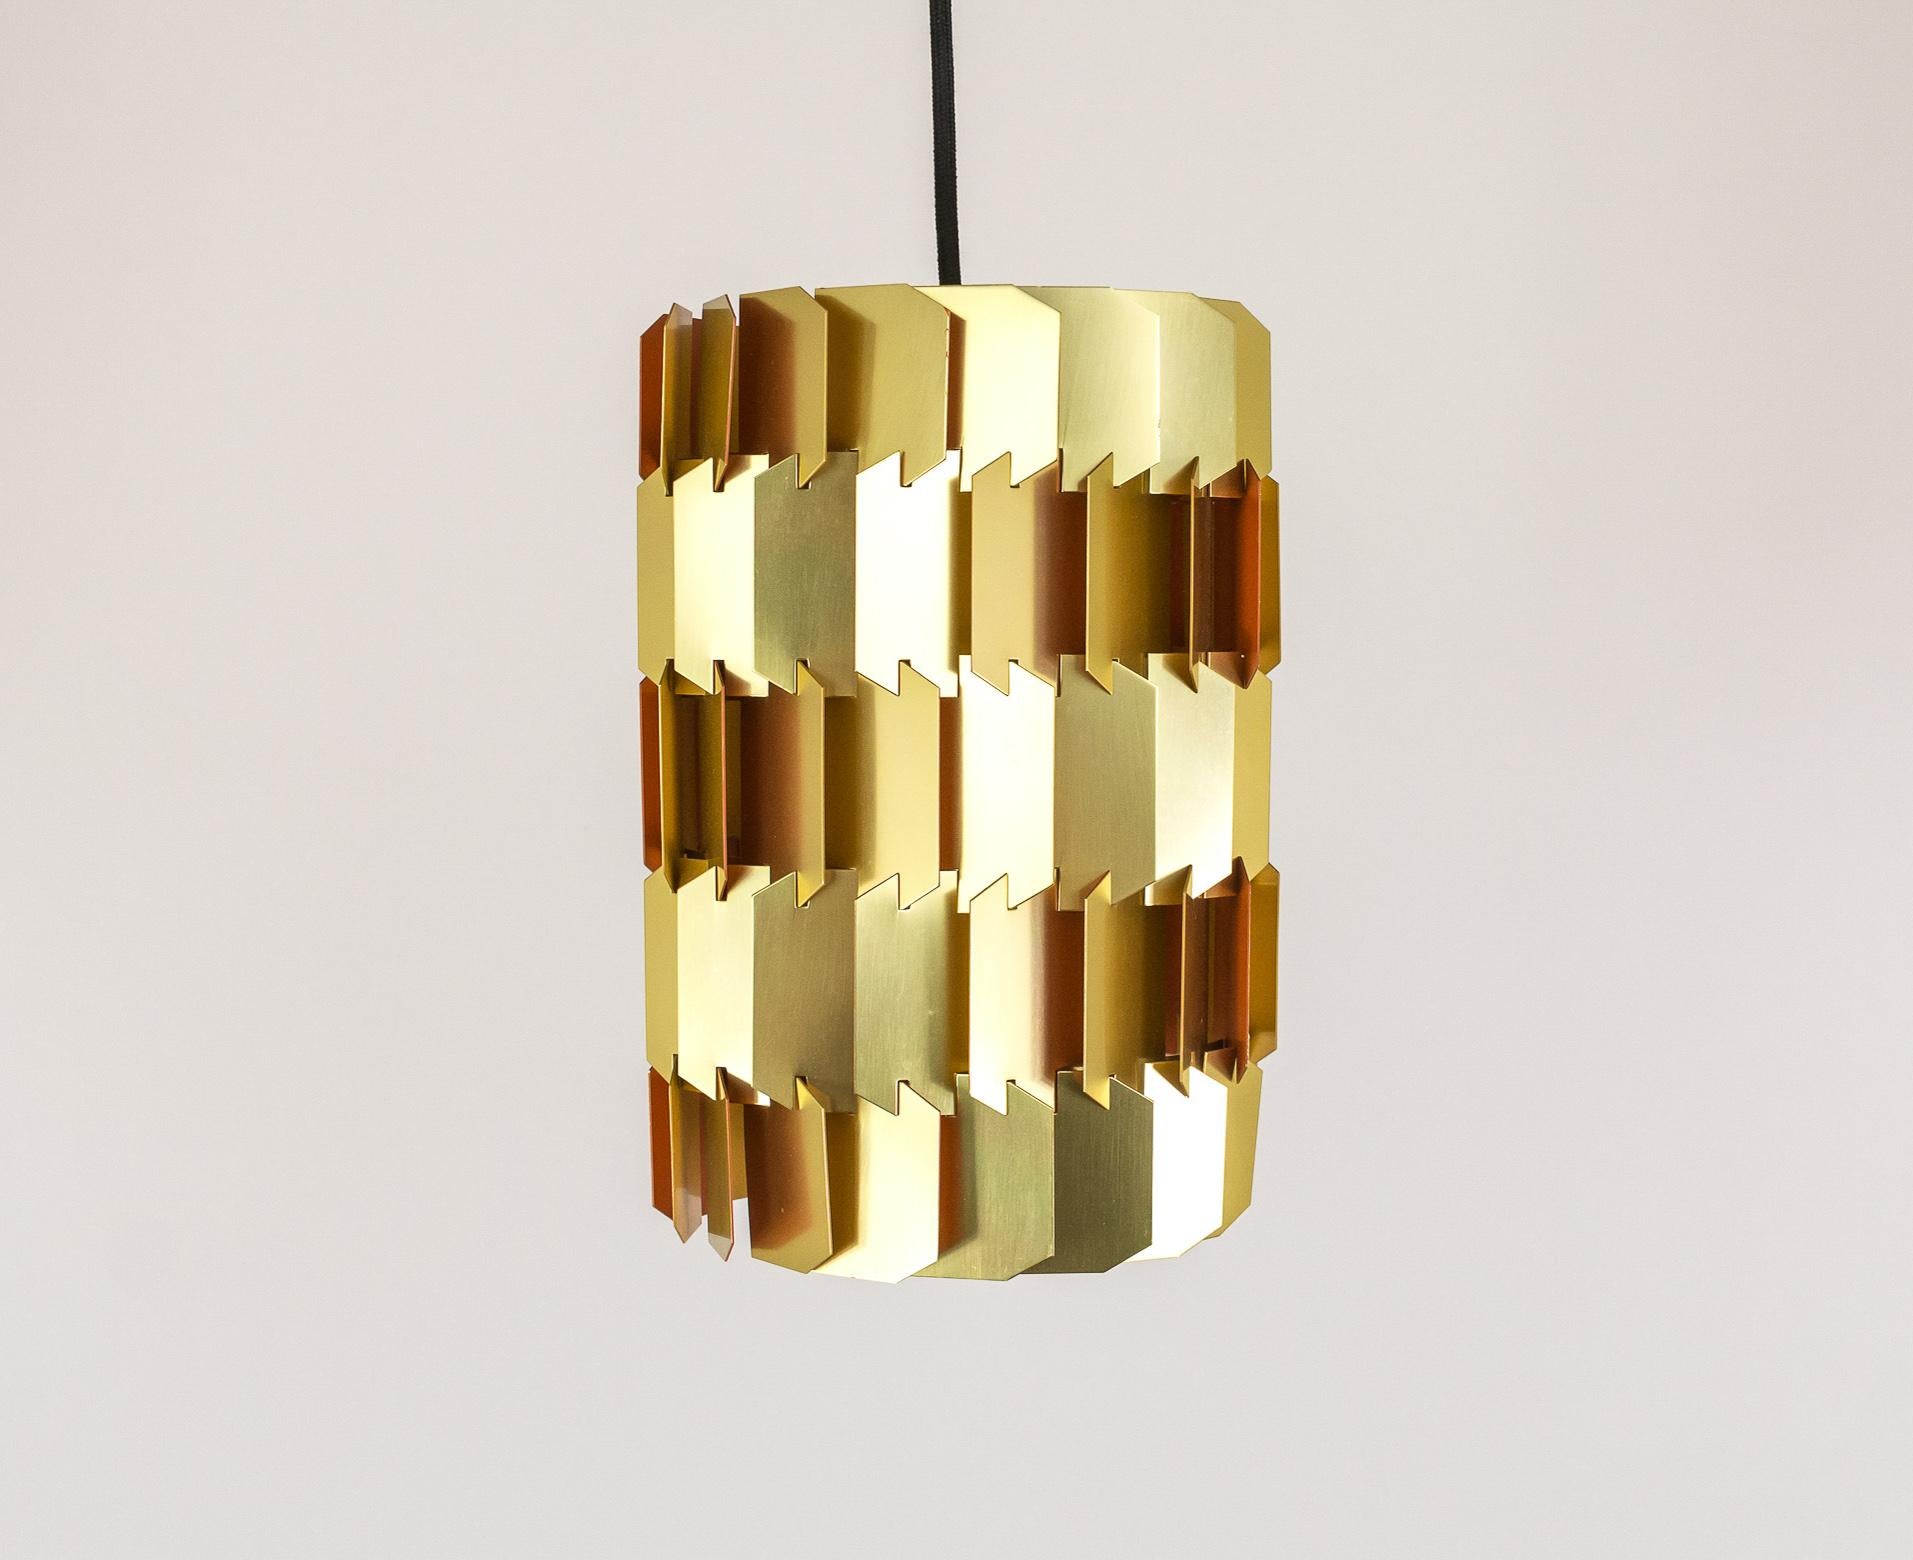 Louis Weisdorf, the distinguished Danish architect and designer, created this gold facet pendant light in 1963. 

The facet consists of 18 identically shaped shades. The construction of the lamp is a 3-D puzzle, as each piece fits into the